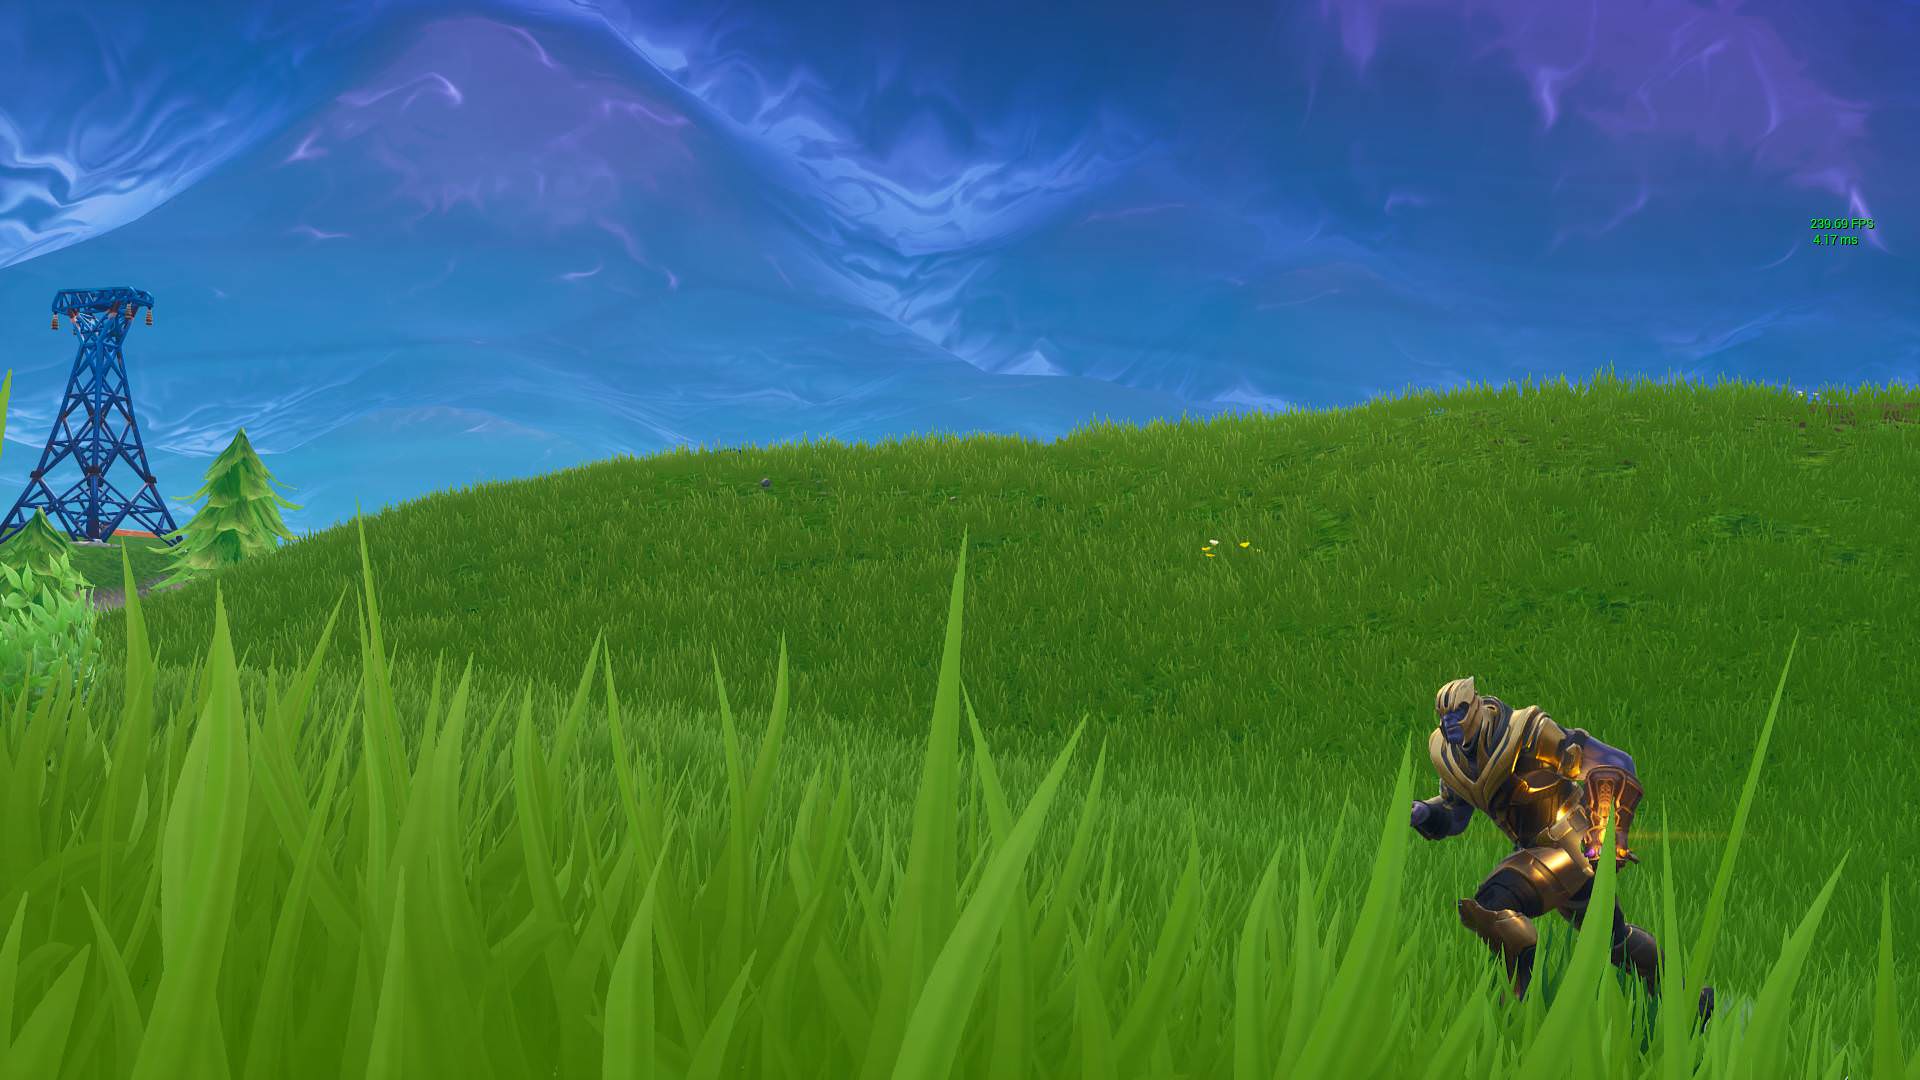 That famous Windows XP bliss wallpaper recreated in Fortnite